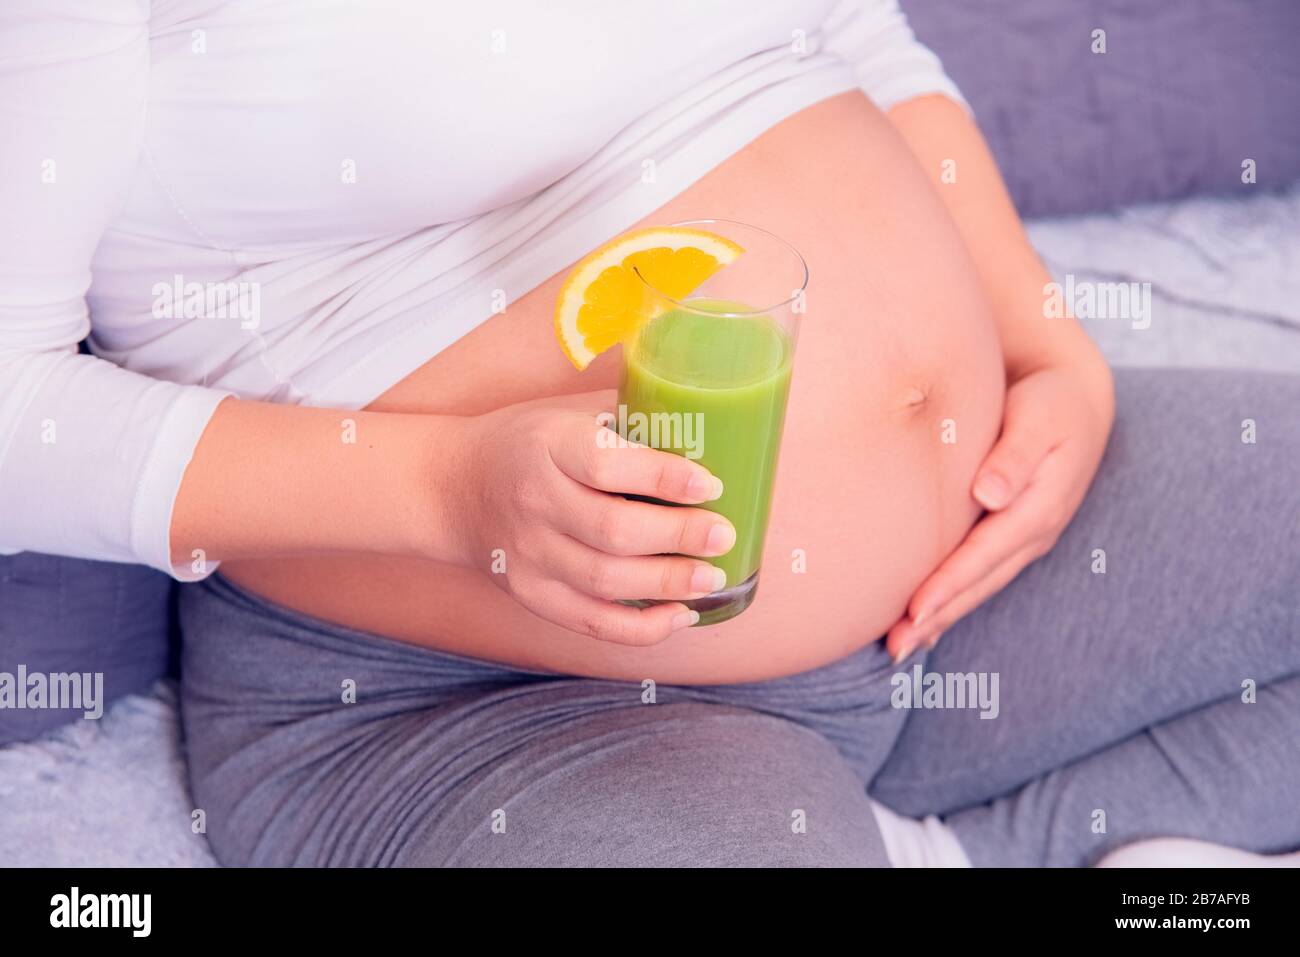 Pregnant woman enjoying her healthy organic green juice while relaxing on the couch at home. Stock Photo